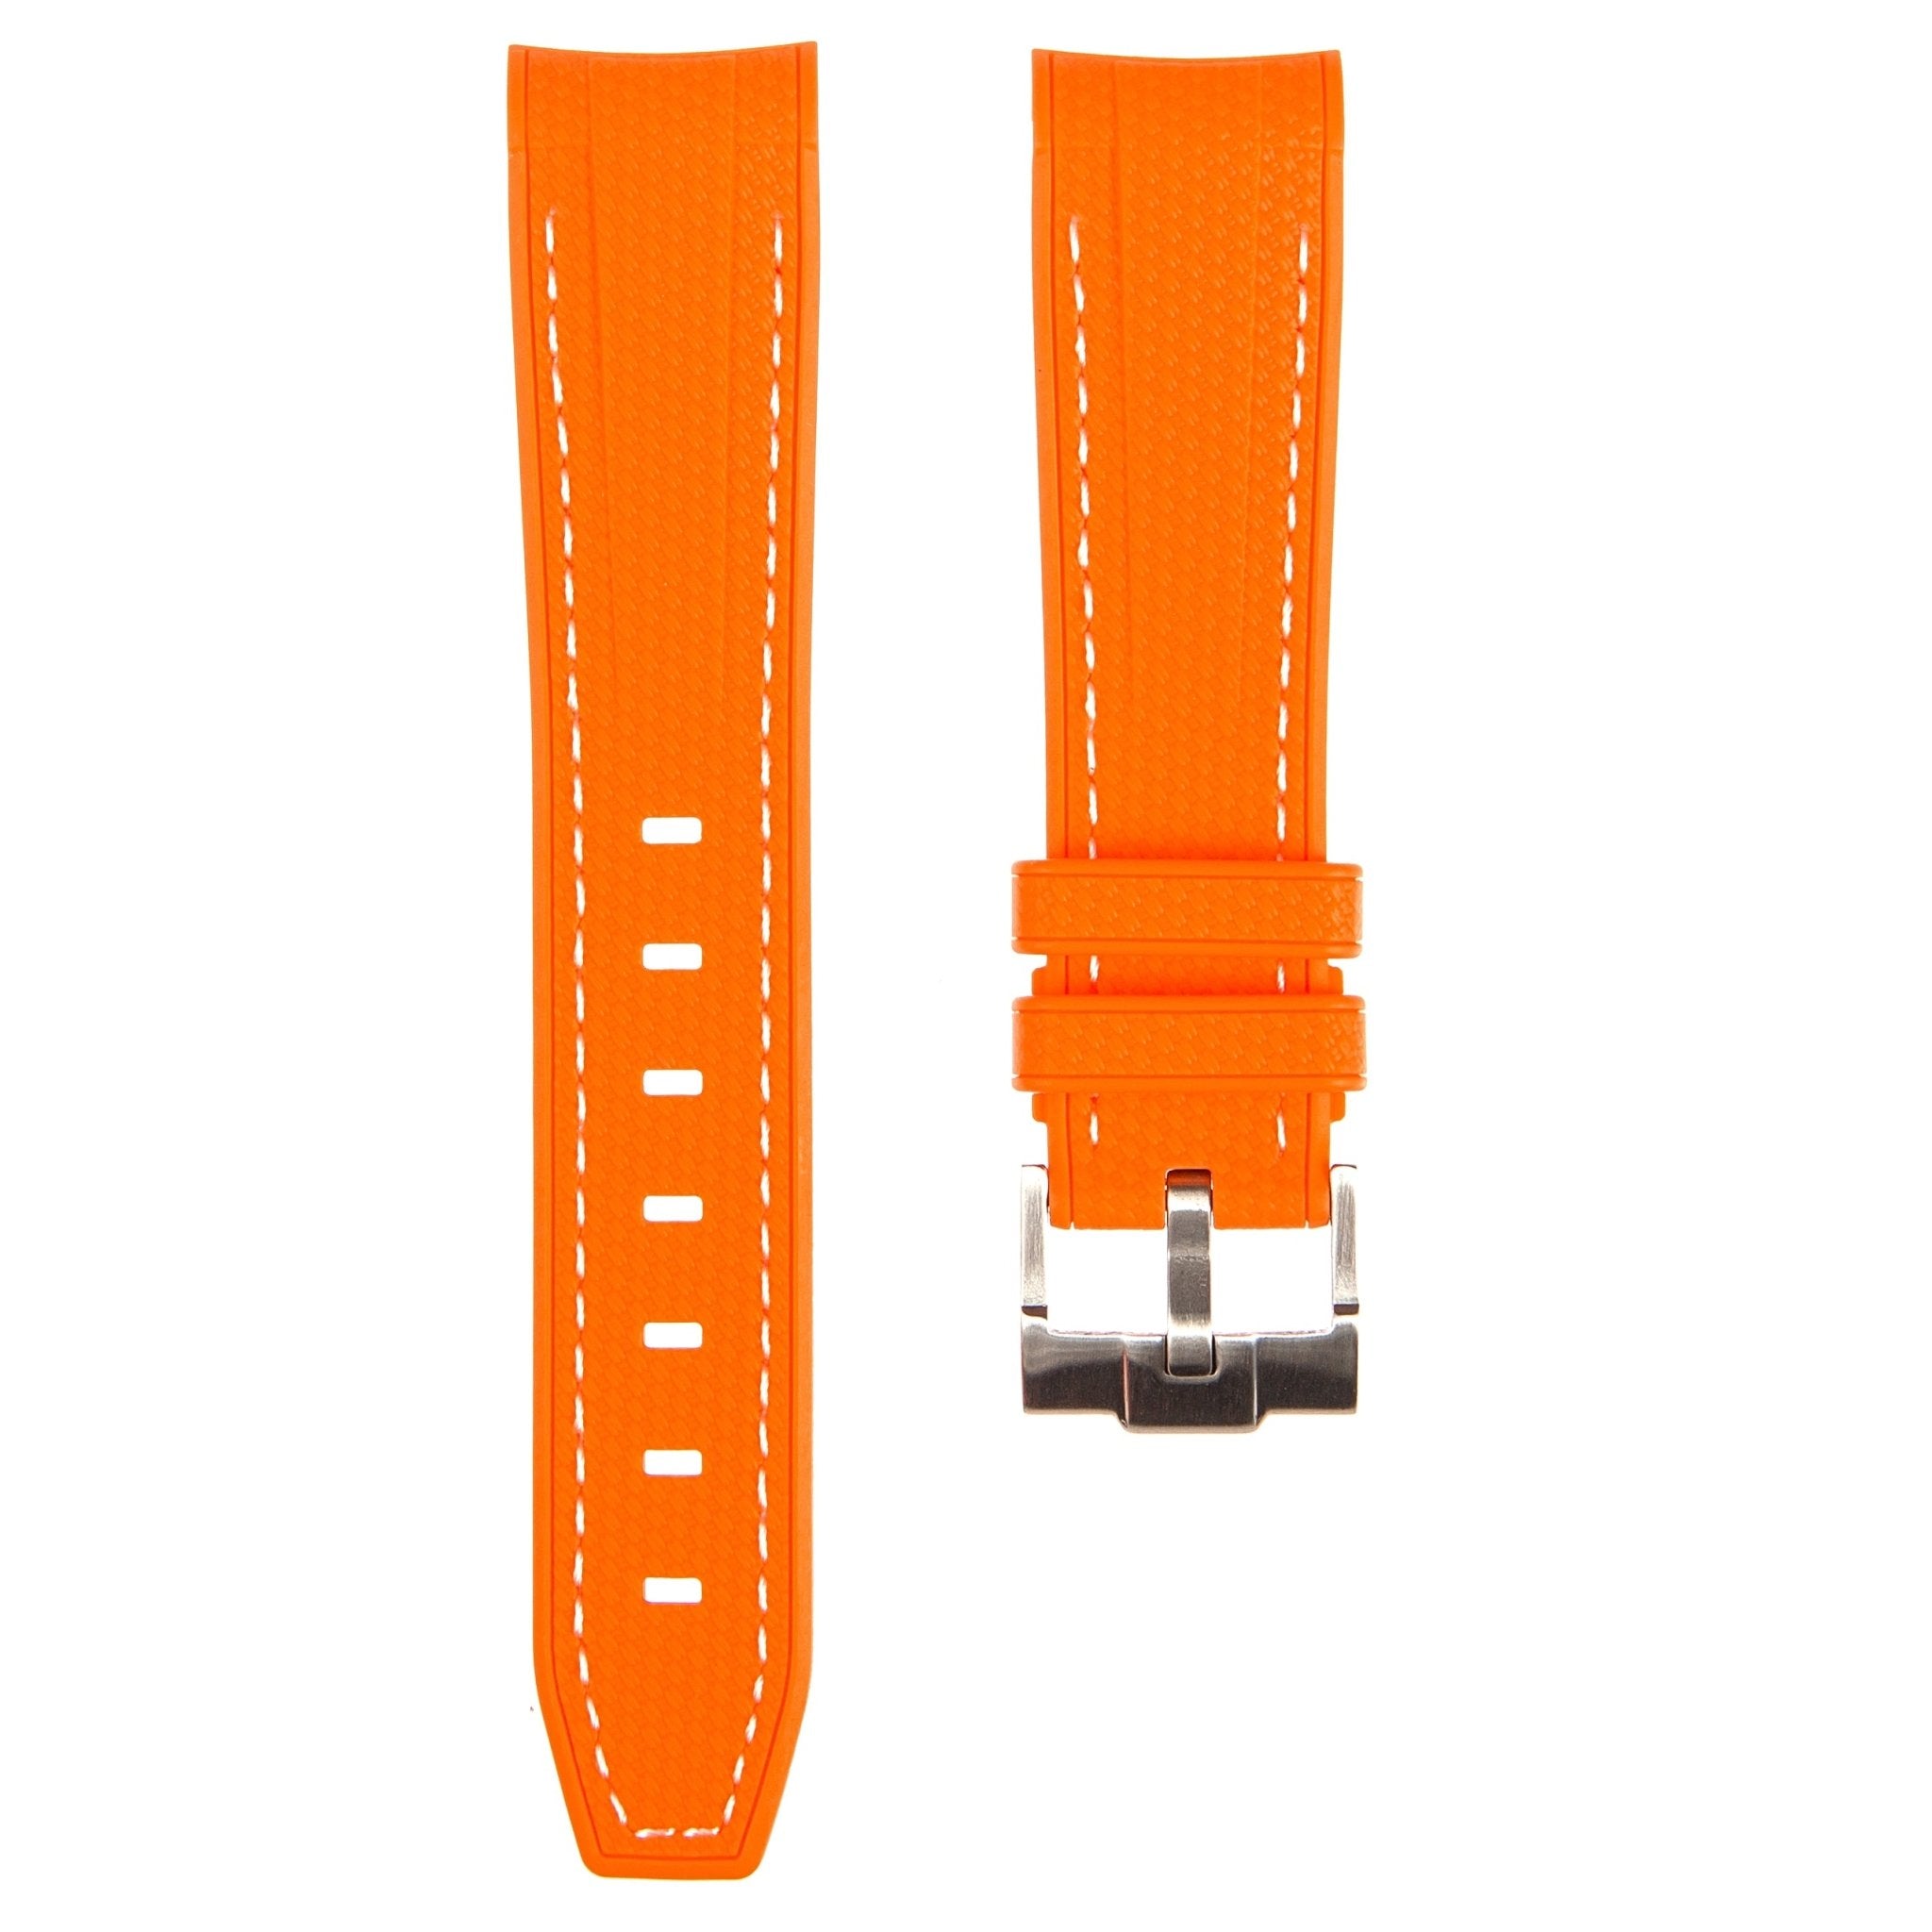 Textured Curved End Premium Silicone Strap - Compatible with Omega Moonwatch - Orange with White Stitch (2405) -StrapSeeker